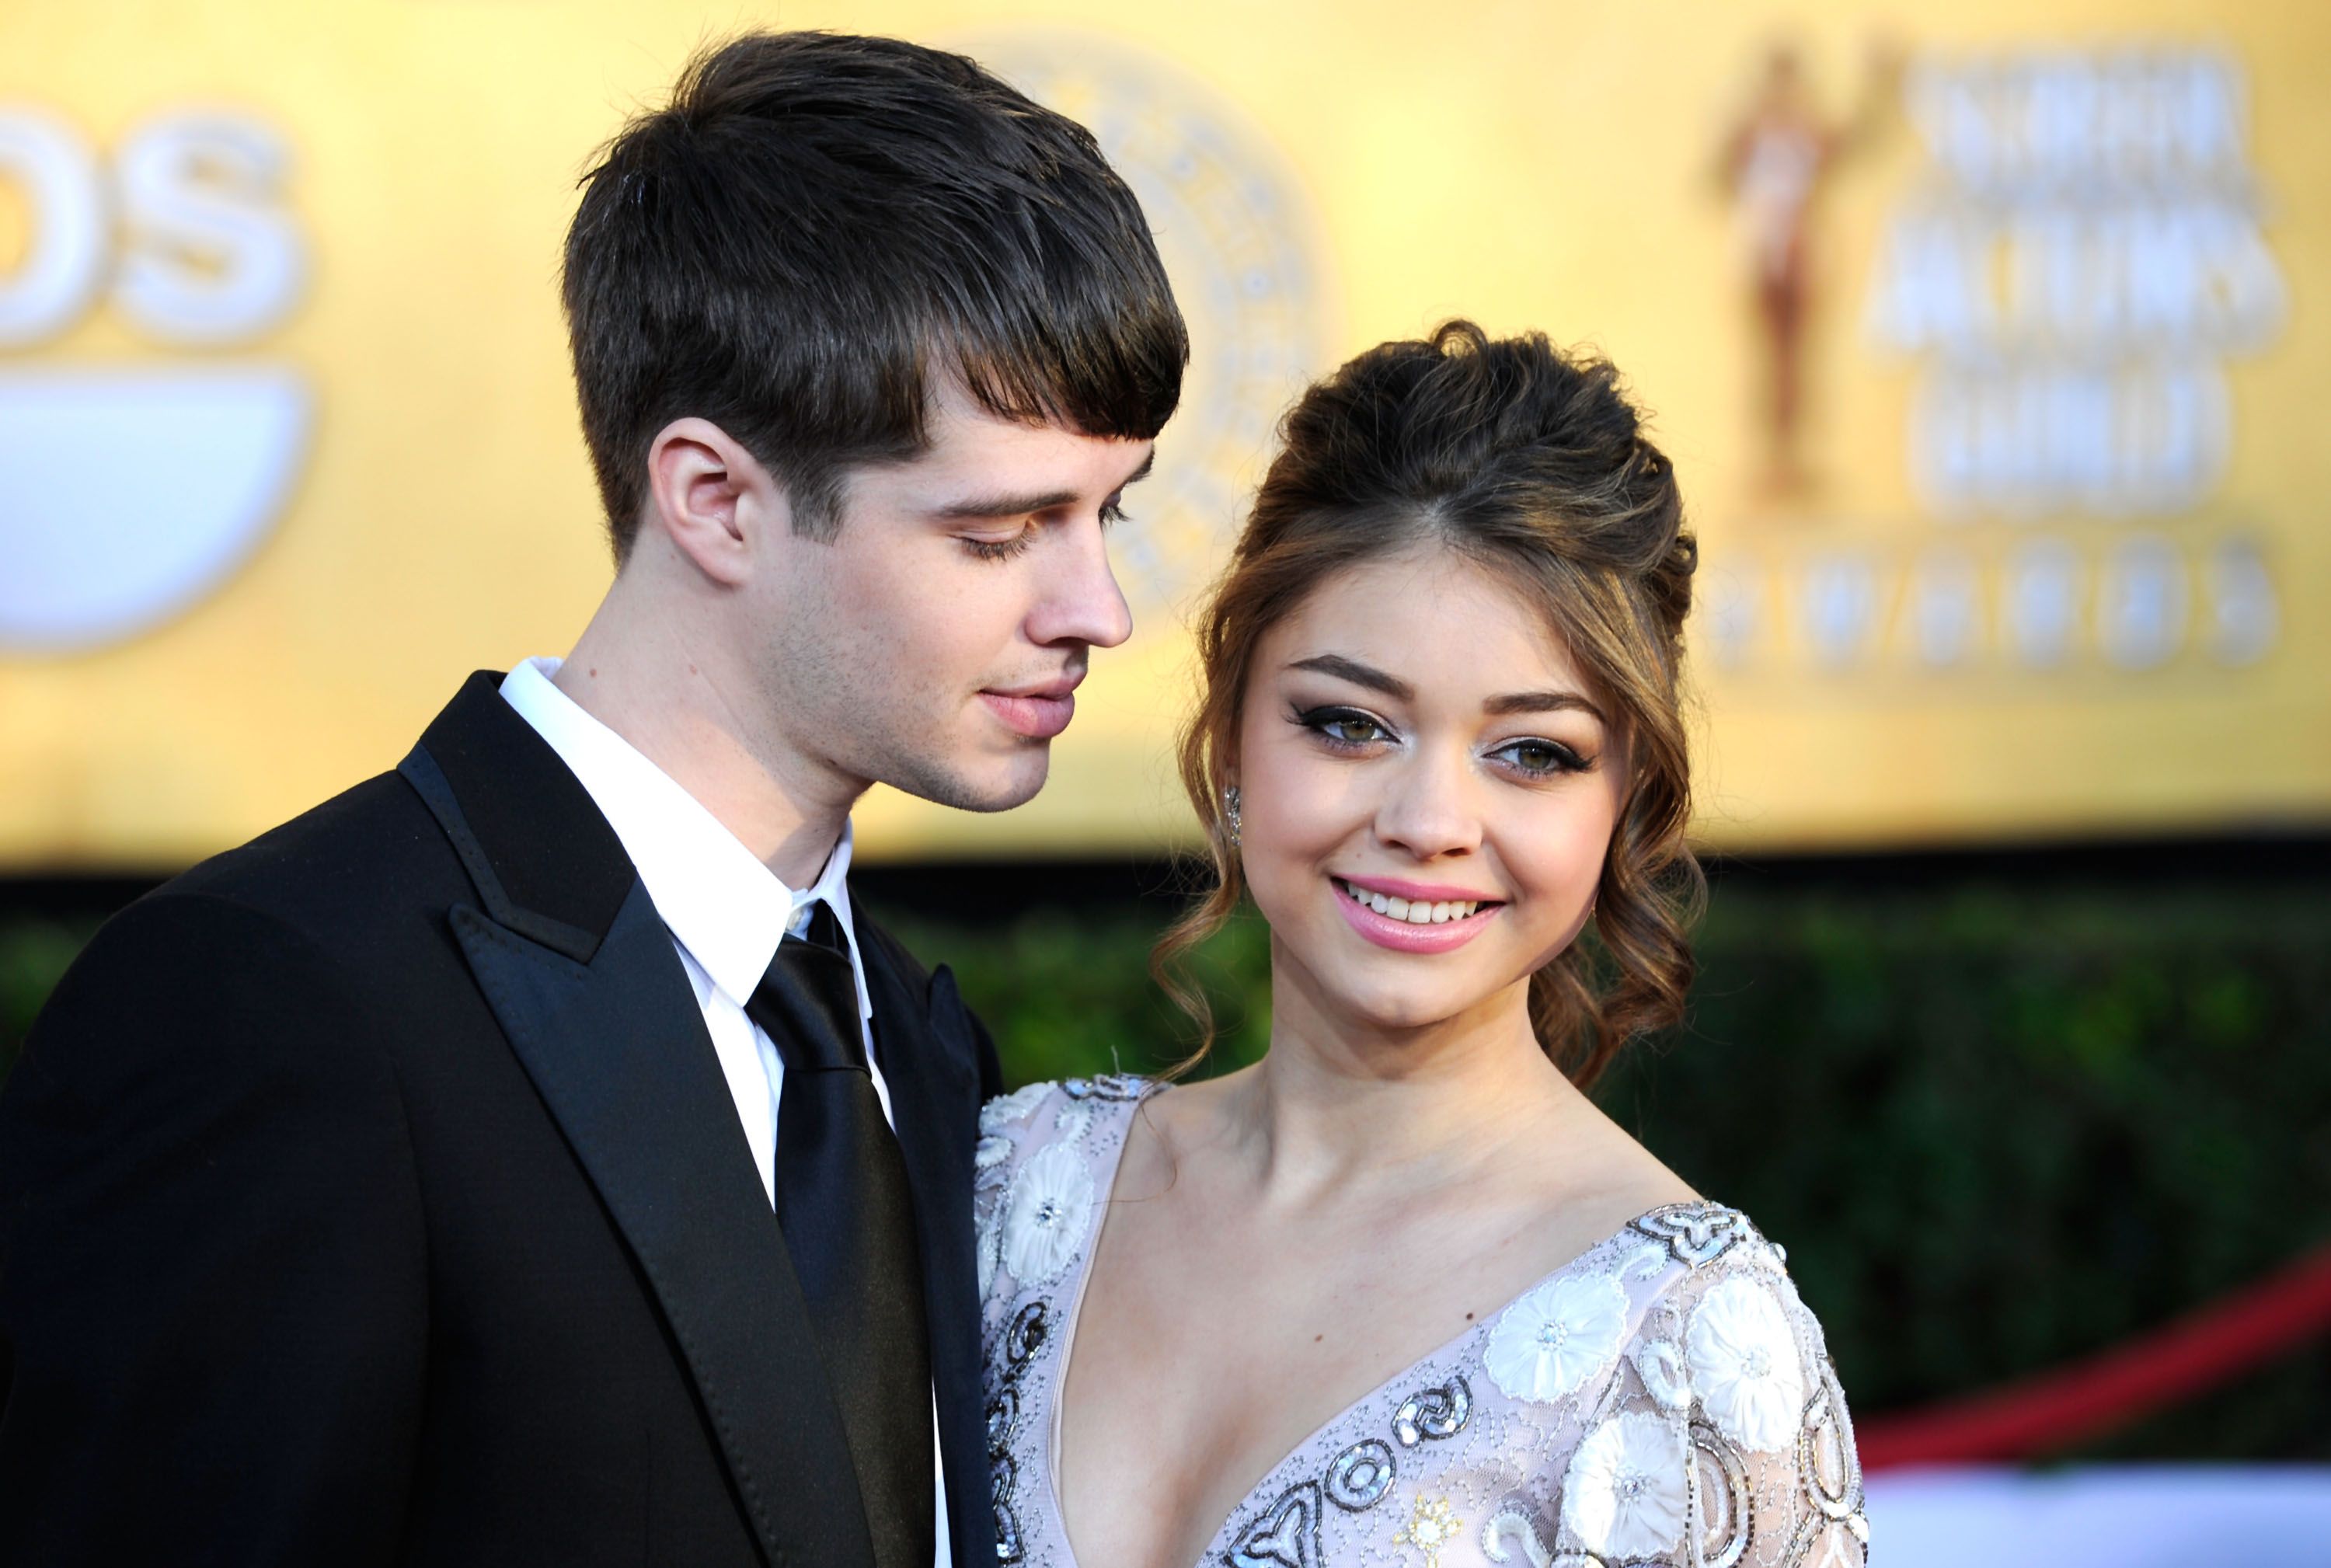 Matt Prokop and Sarah Hyland at the 18th Annual Screen Actors Guild Awards in 2012 in Los Angeles | Source: Getty Images